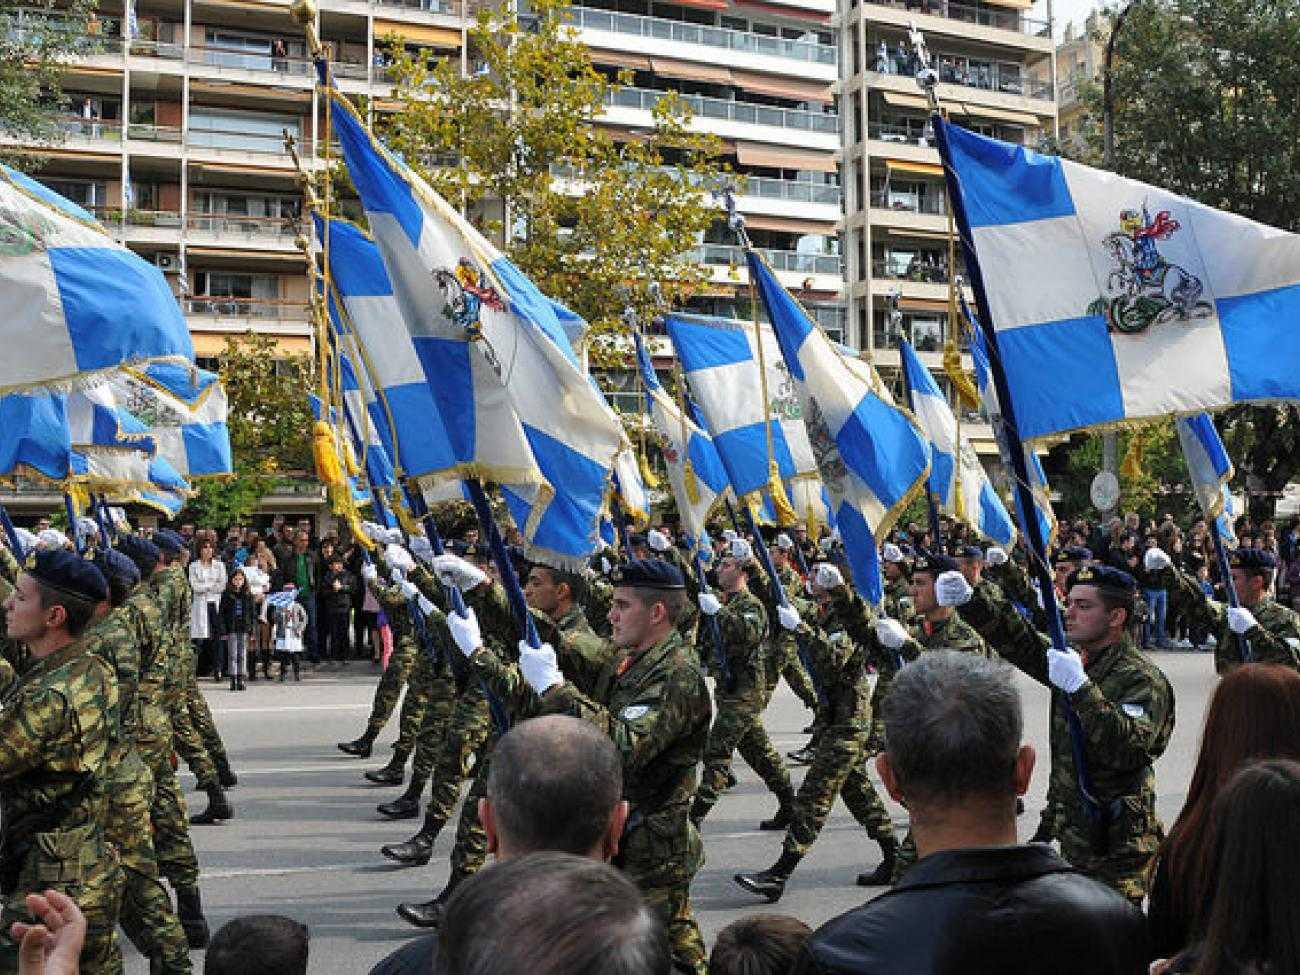 A military parade in Thessaloniki, Greece in 2015. Photo from Flickr